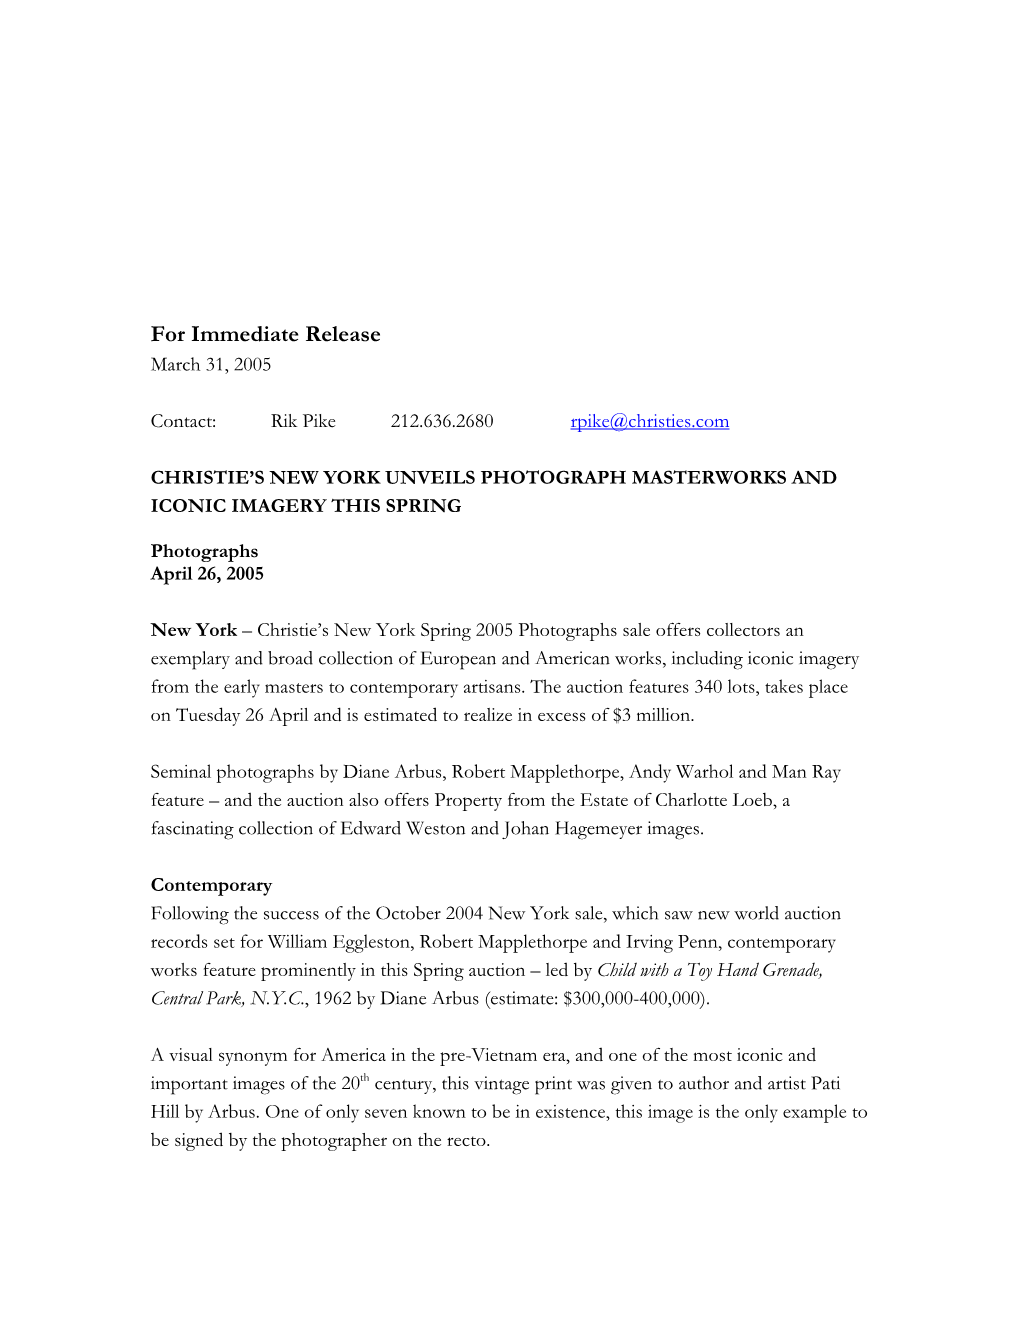 For Immediate Release March 31, 2005